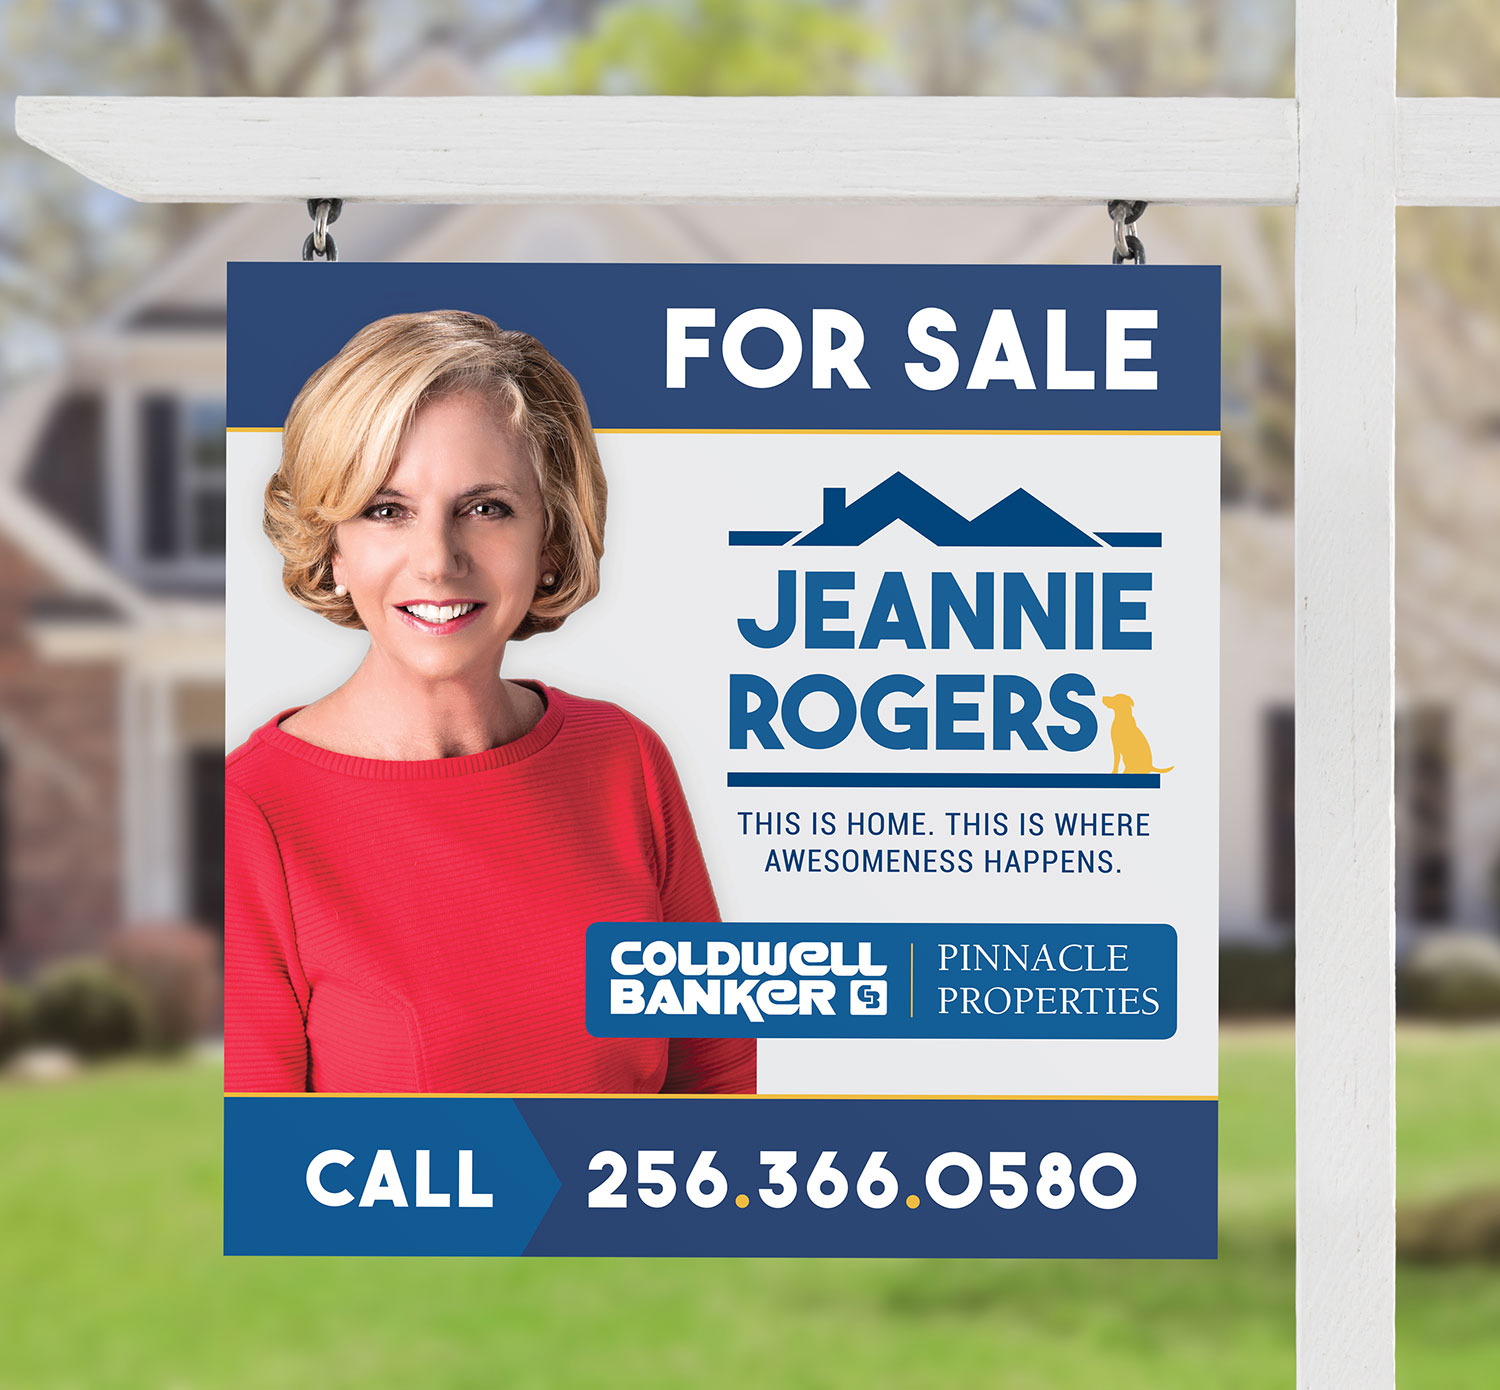 Jeannie Rogers Real Estate Branding, Advertising and Marketing Collateral Design